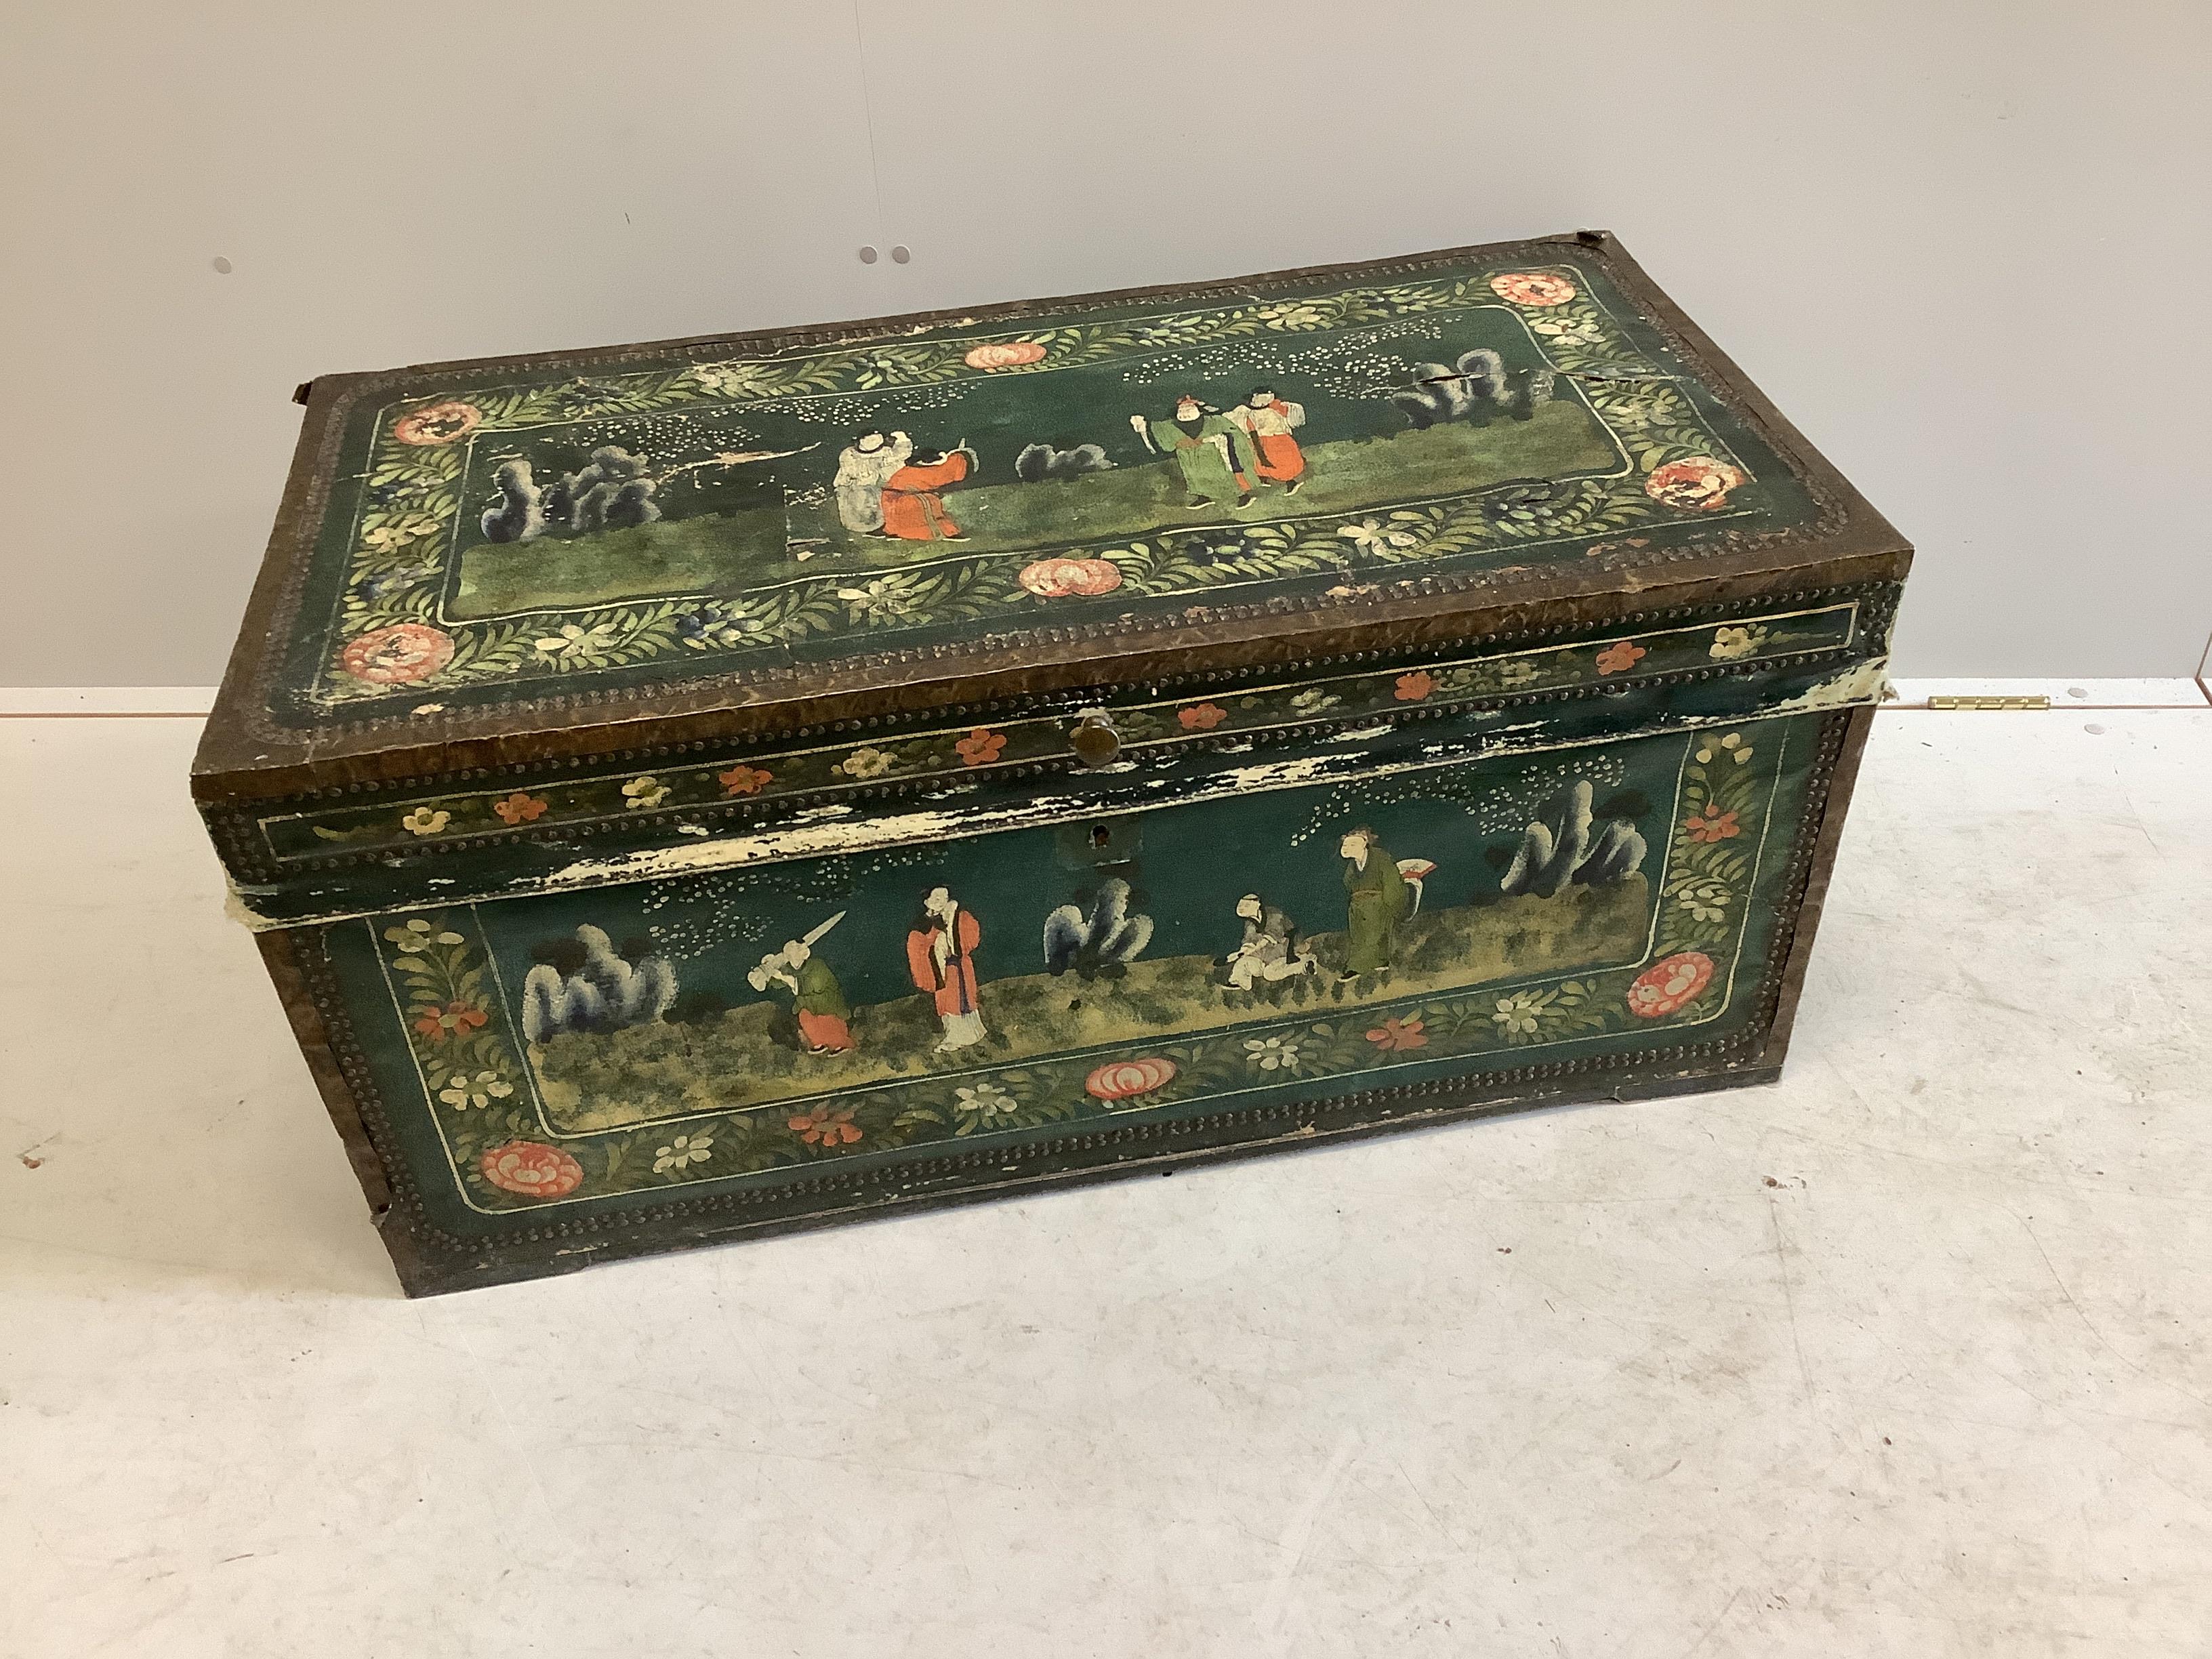 A Japanese rectangular brass and leather mounted camphorwood trunk painted with figures in